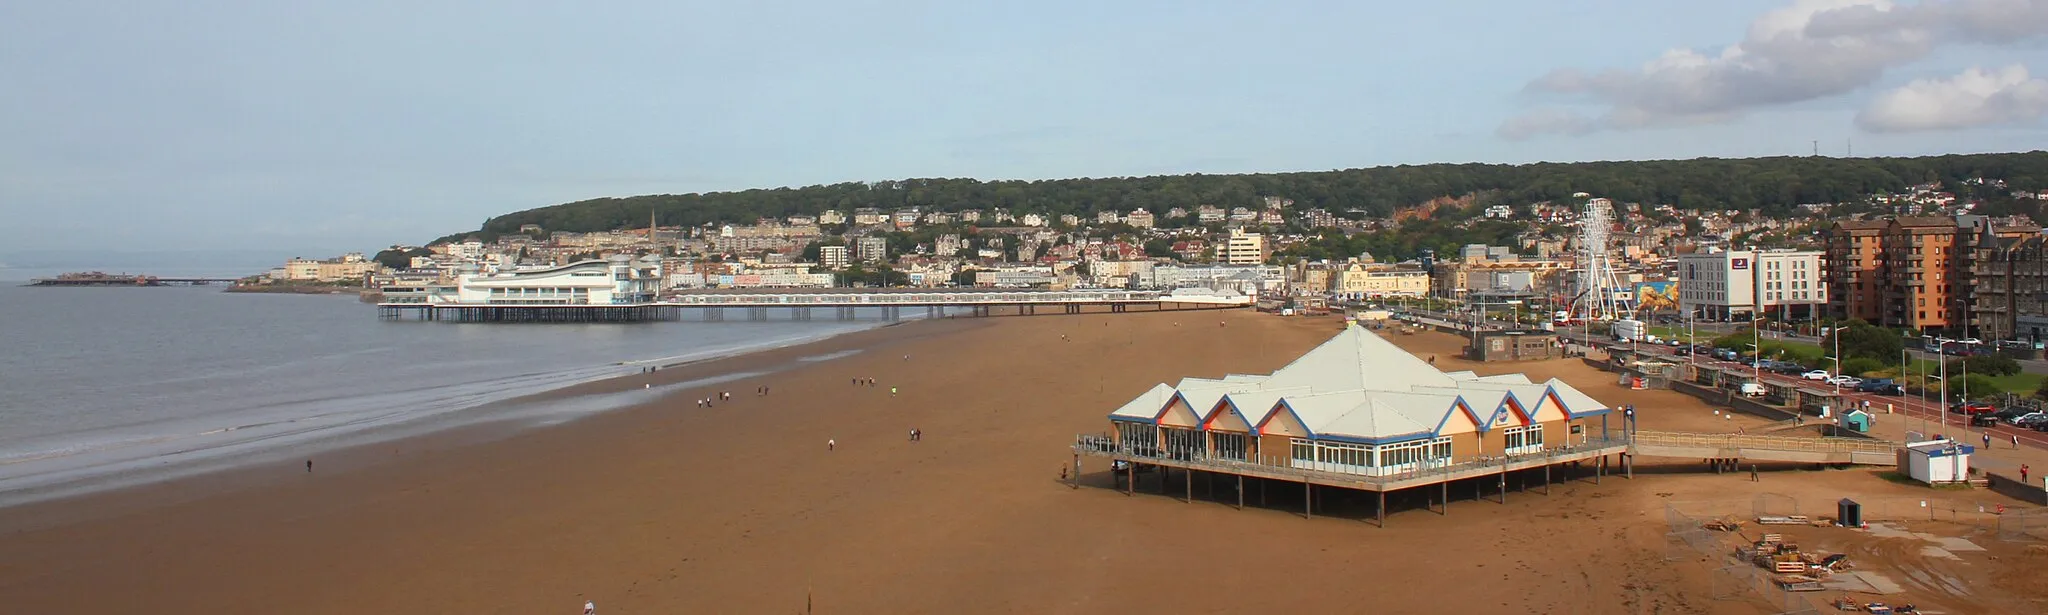 Photo showing: The view across Weston-super-Mare from a viewpoint above the Tropicana. The Birnbeck (or 'Old') pier juts out from the end of Worlebury Hill. The Grand Pier hides Knightsone Island and the north end of the sea front. The former Sea Life Centre is the third pier in the foreground, currently used as a café.